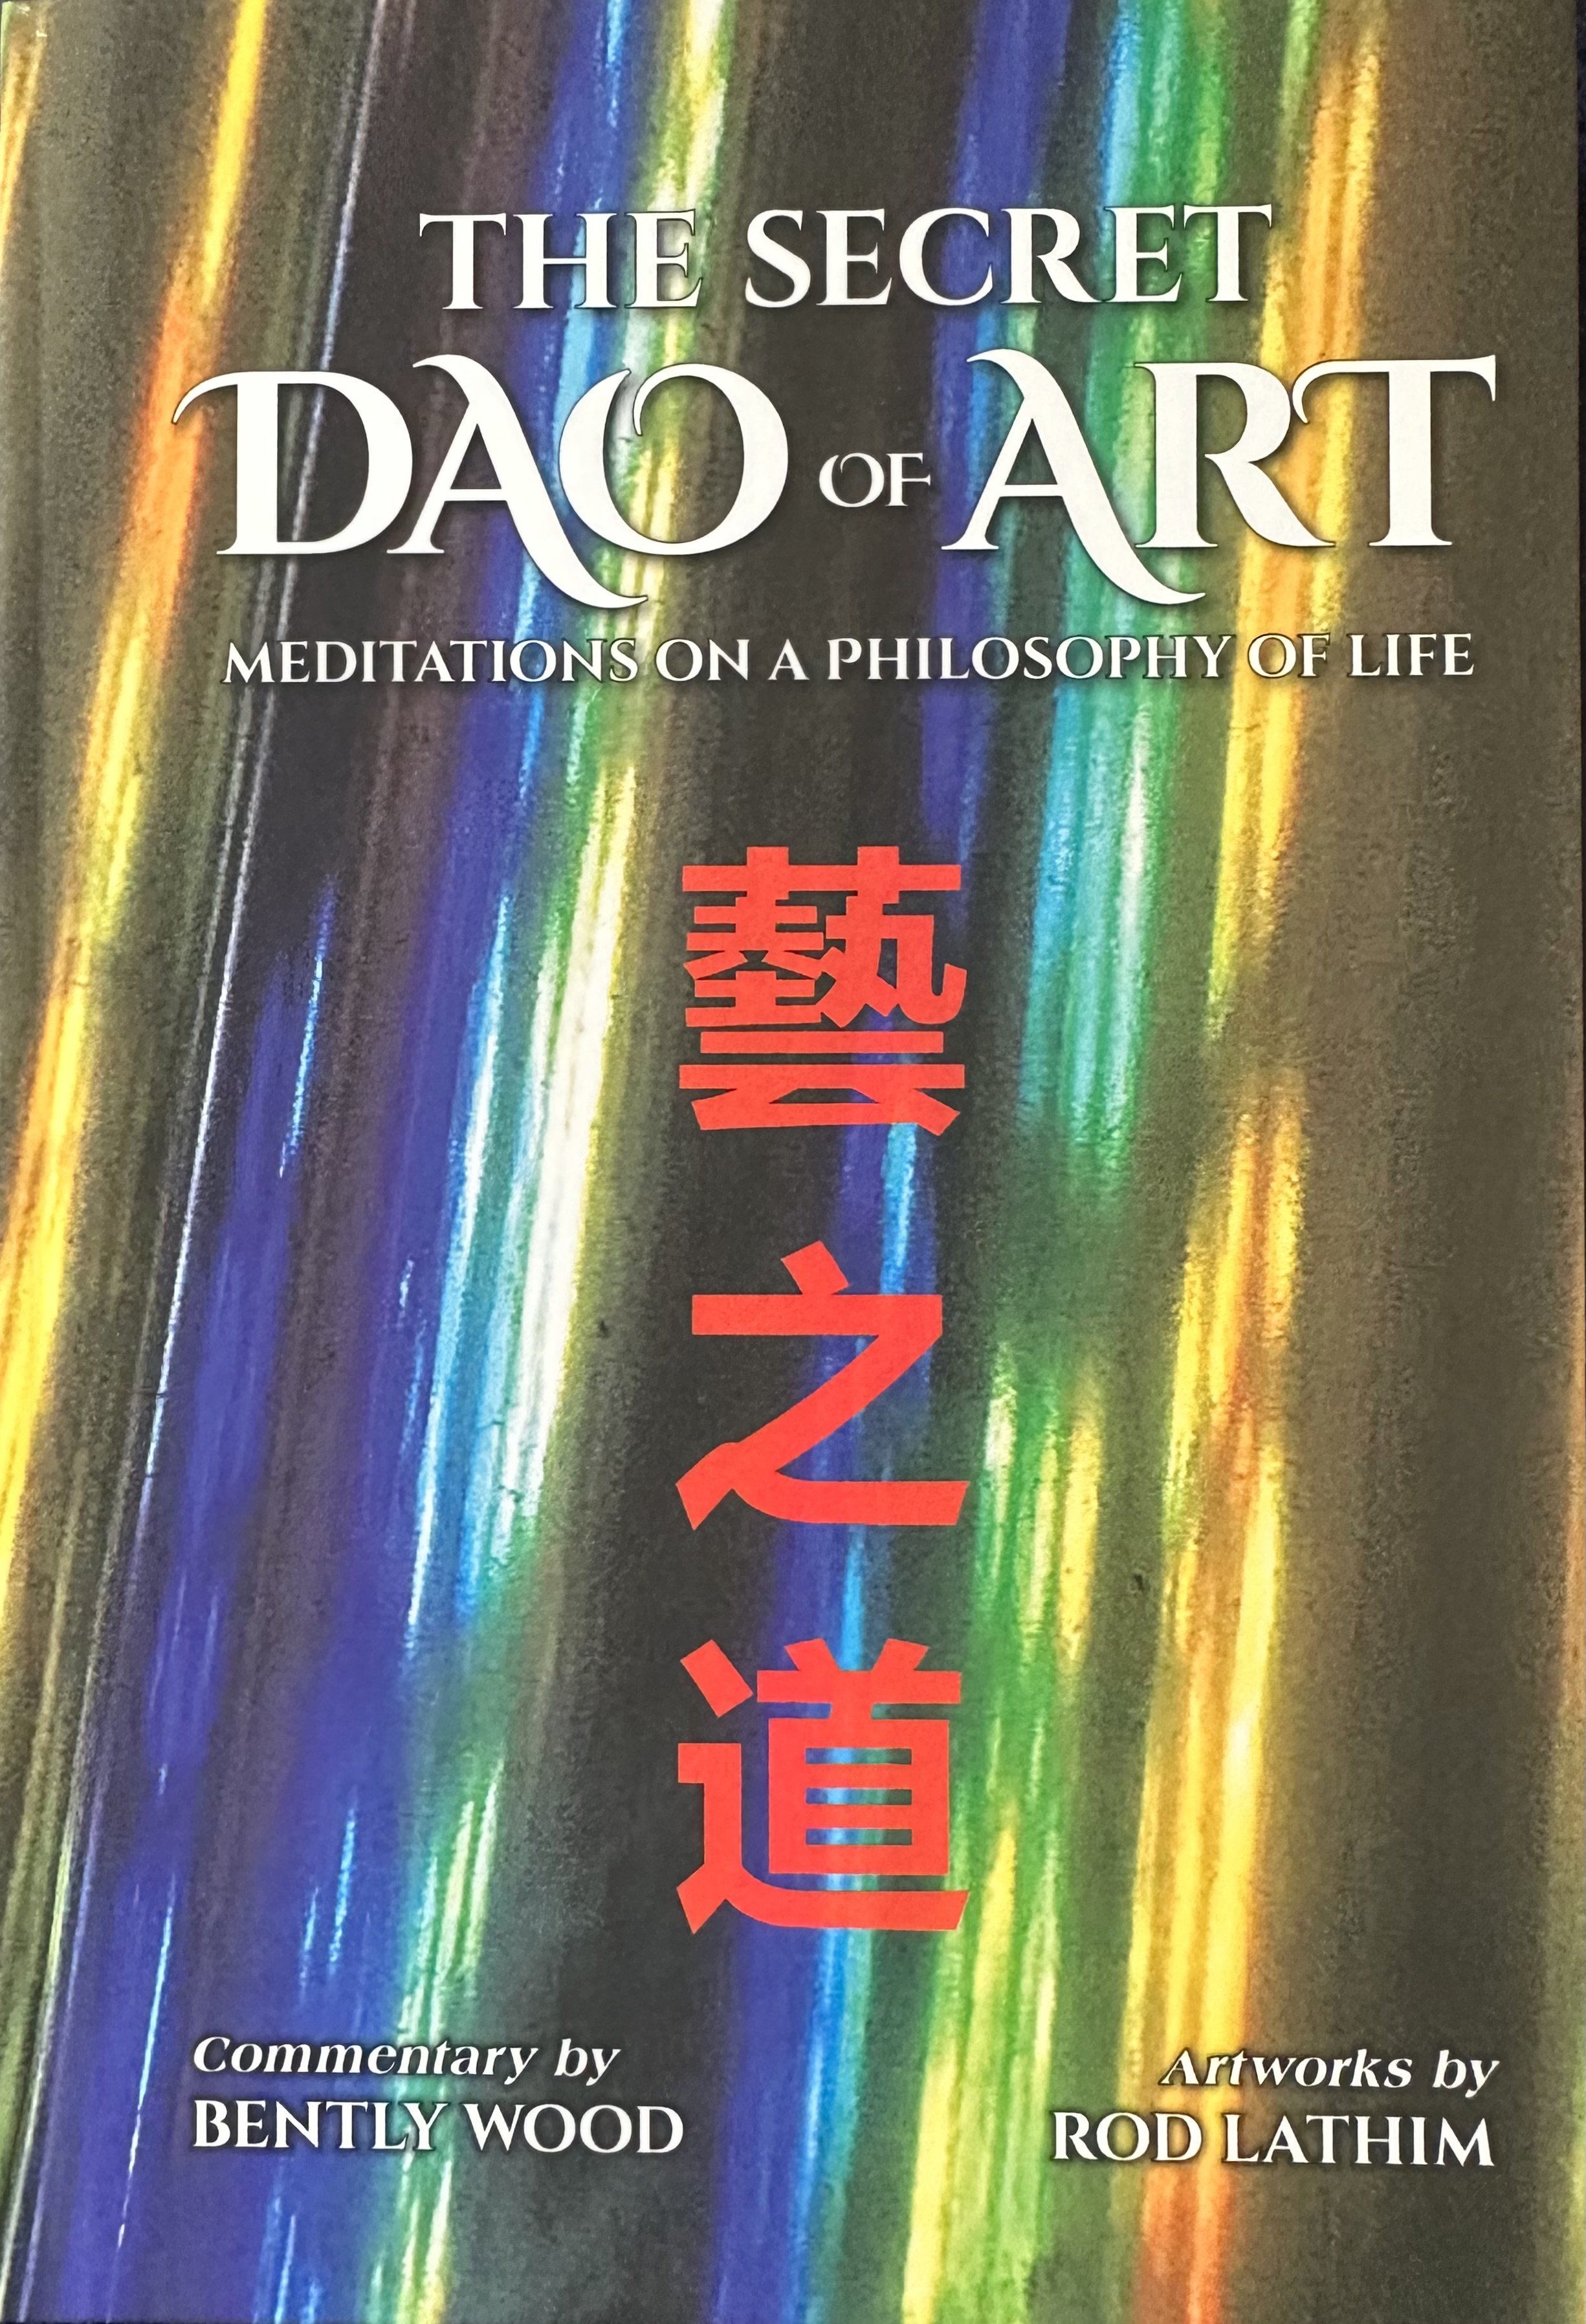 "The Secret Dao of Art - Meditations on a Philosophy of Life" by Z - cover and interior art/photography by Rod Lathim